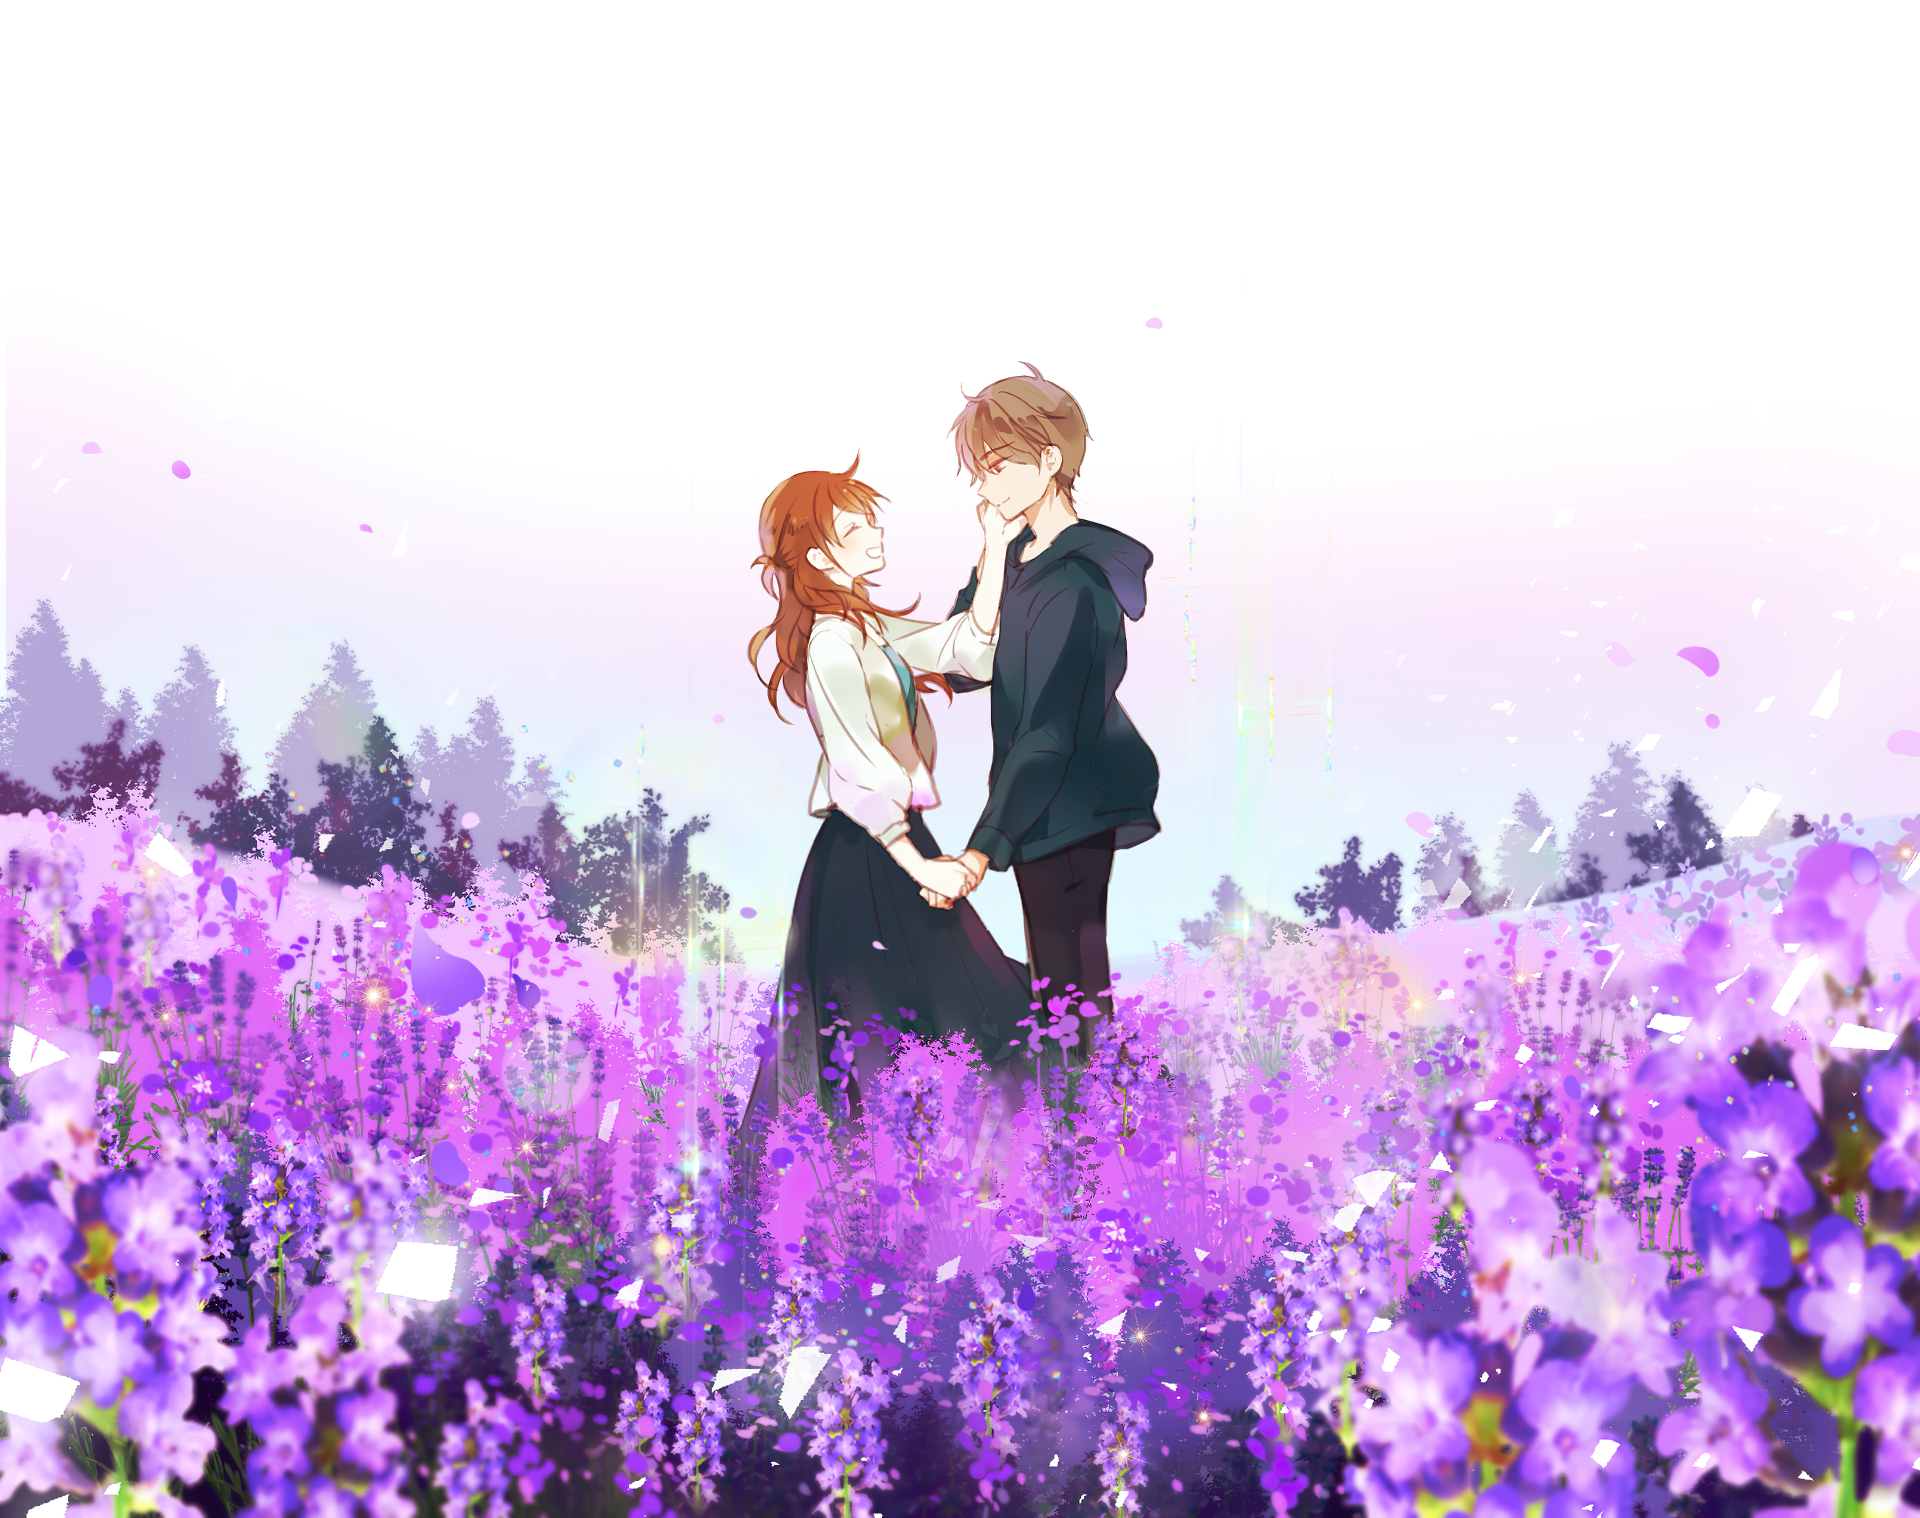 Couple picture anime profile - Photo #2043 - PNG Wala - Photo And PNG 100%  Free Stock Images